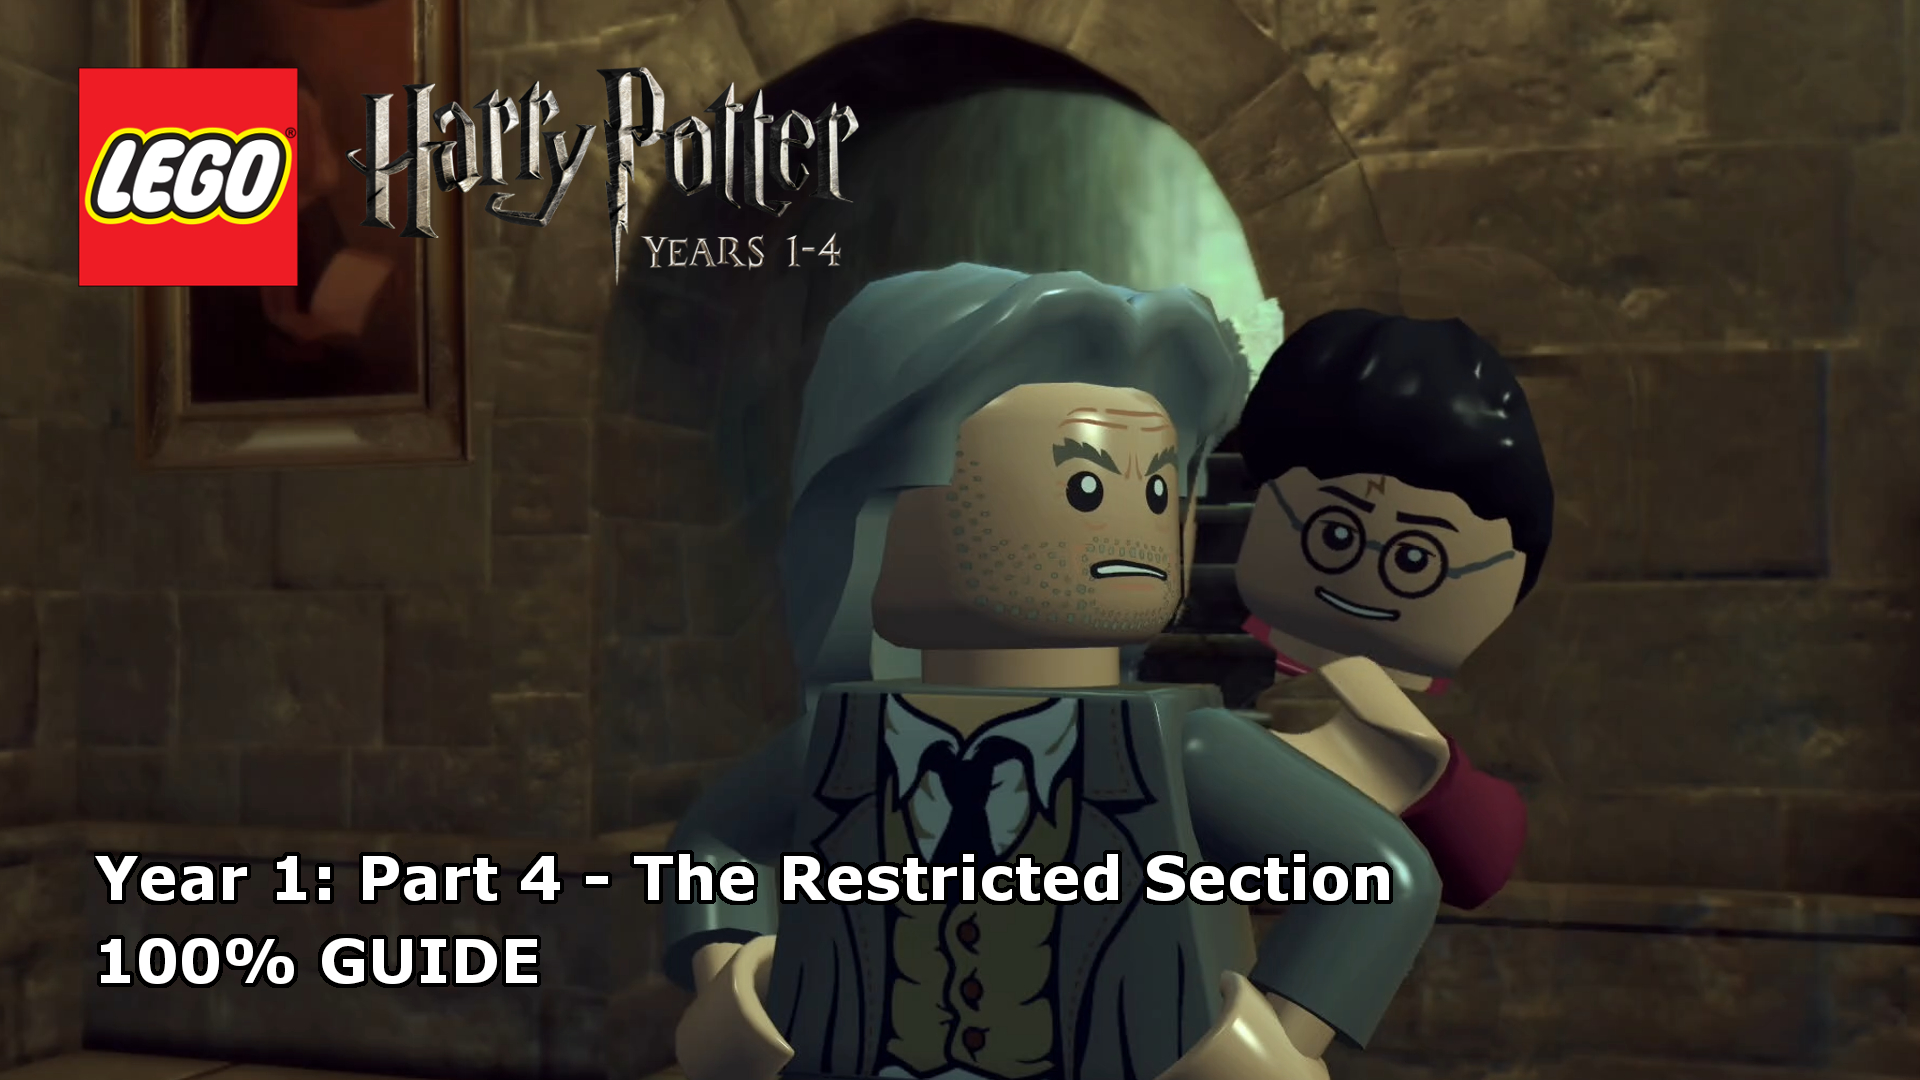 Lego Harry Potter: Years 1-4 The Restricted Section